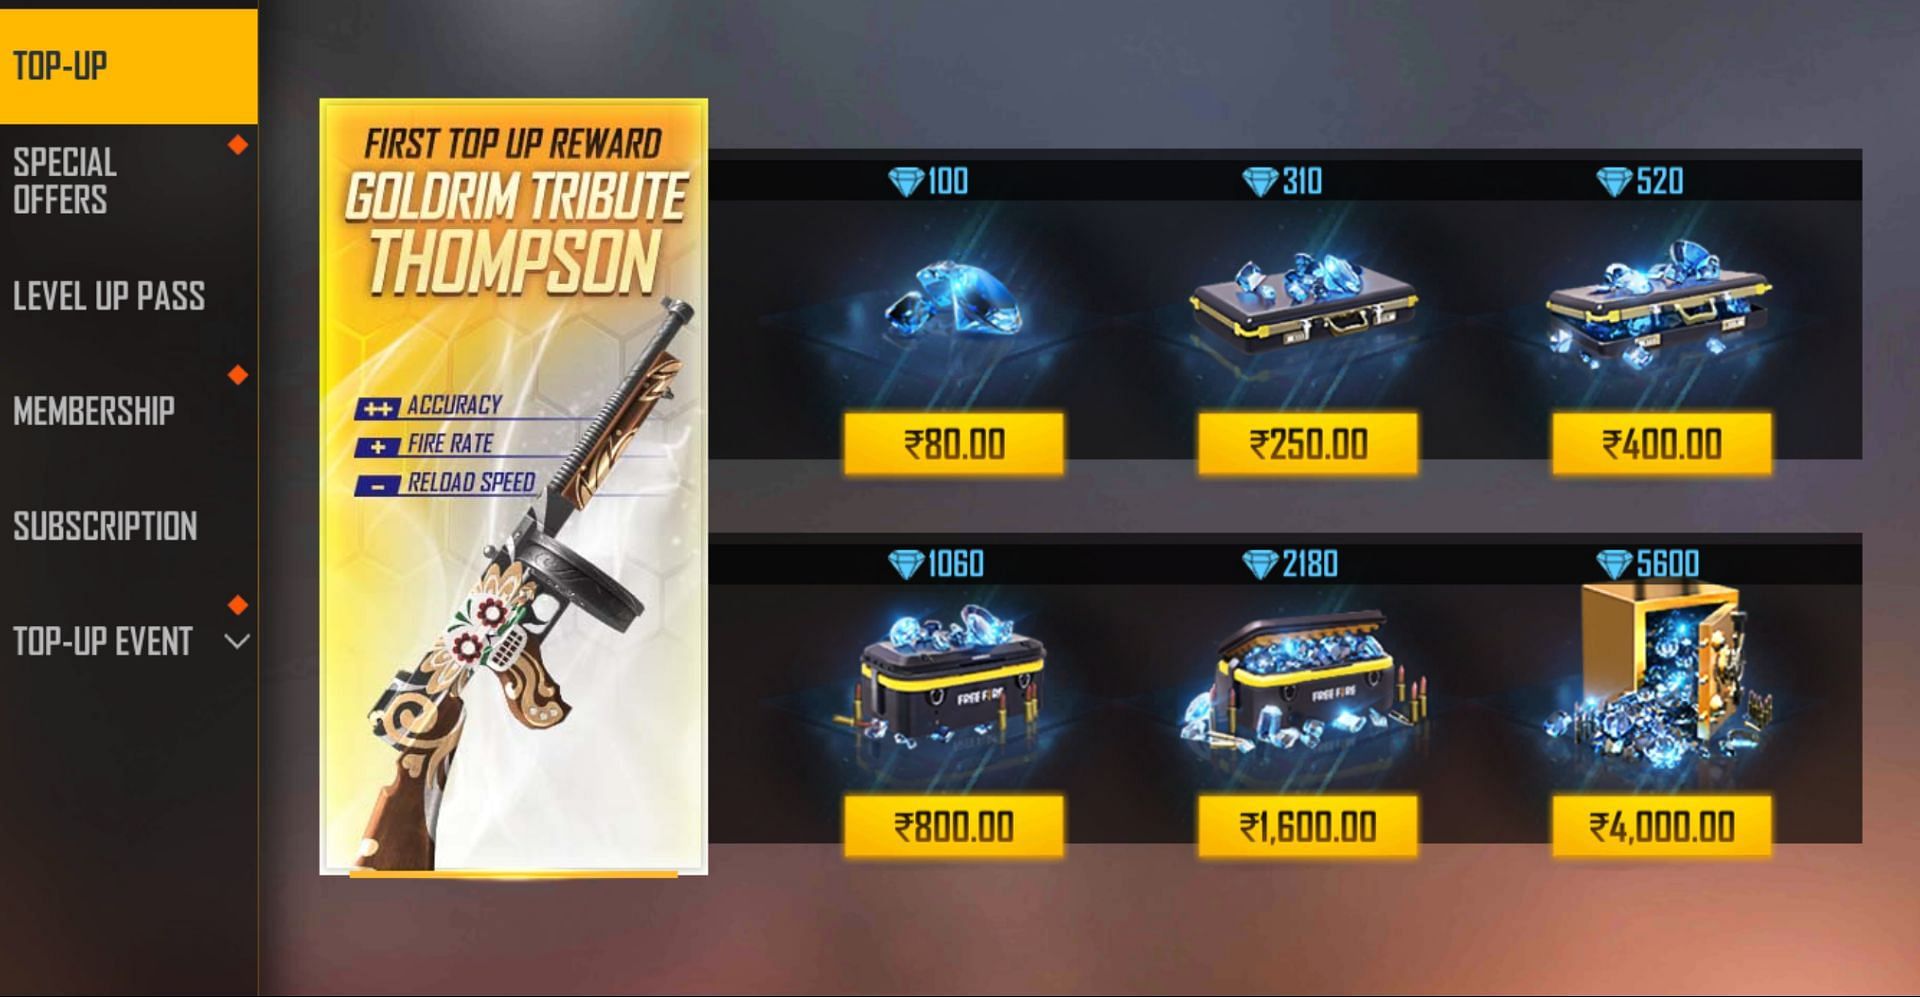 Individuals can purchase 310 diamonds to claim both the rewards mentioned above (Image via Garena)